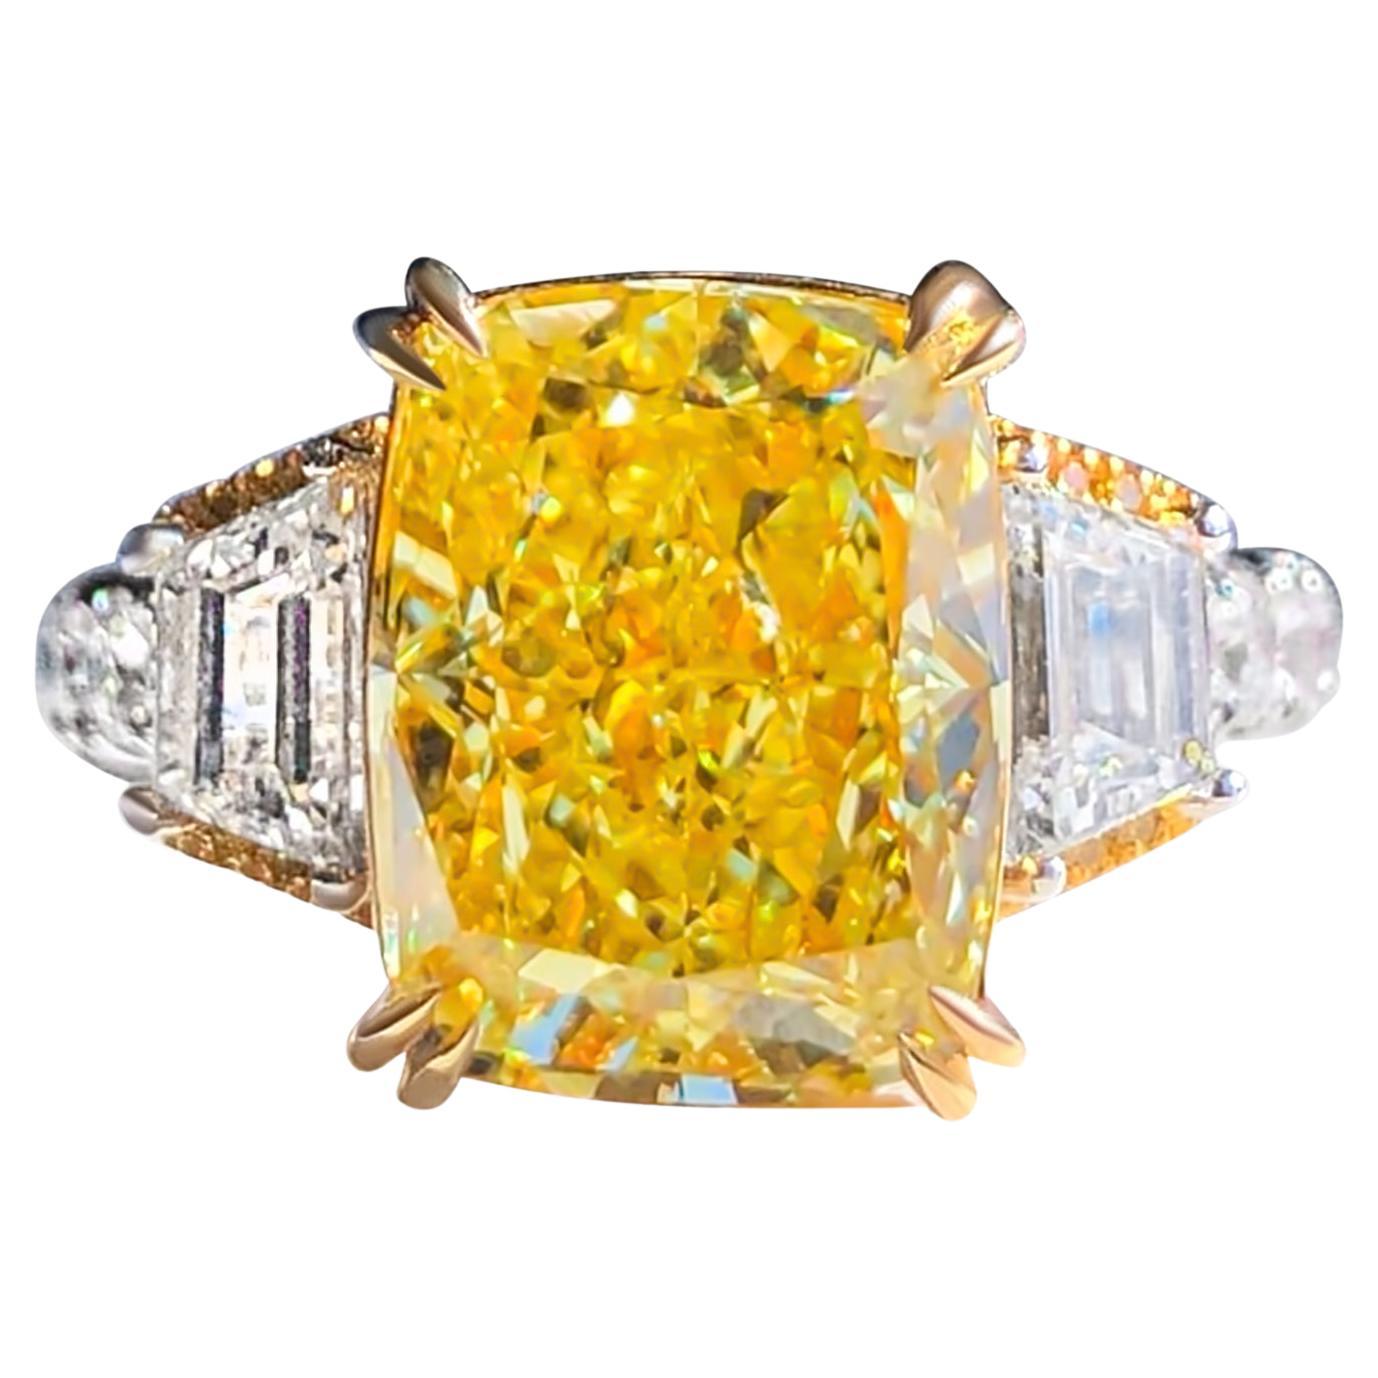 GIA Certified 5.01 Carat Yellow Cushion Diamond Engagement Ring For Sale